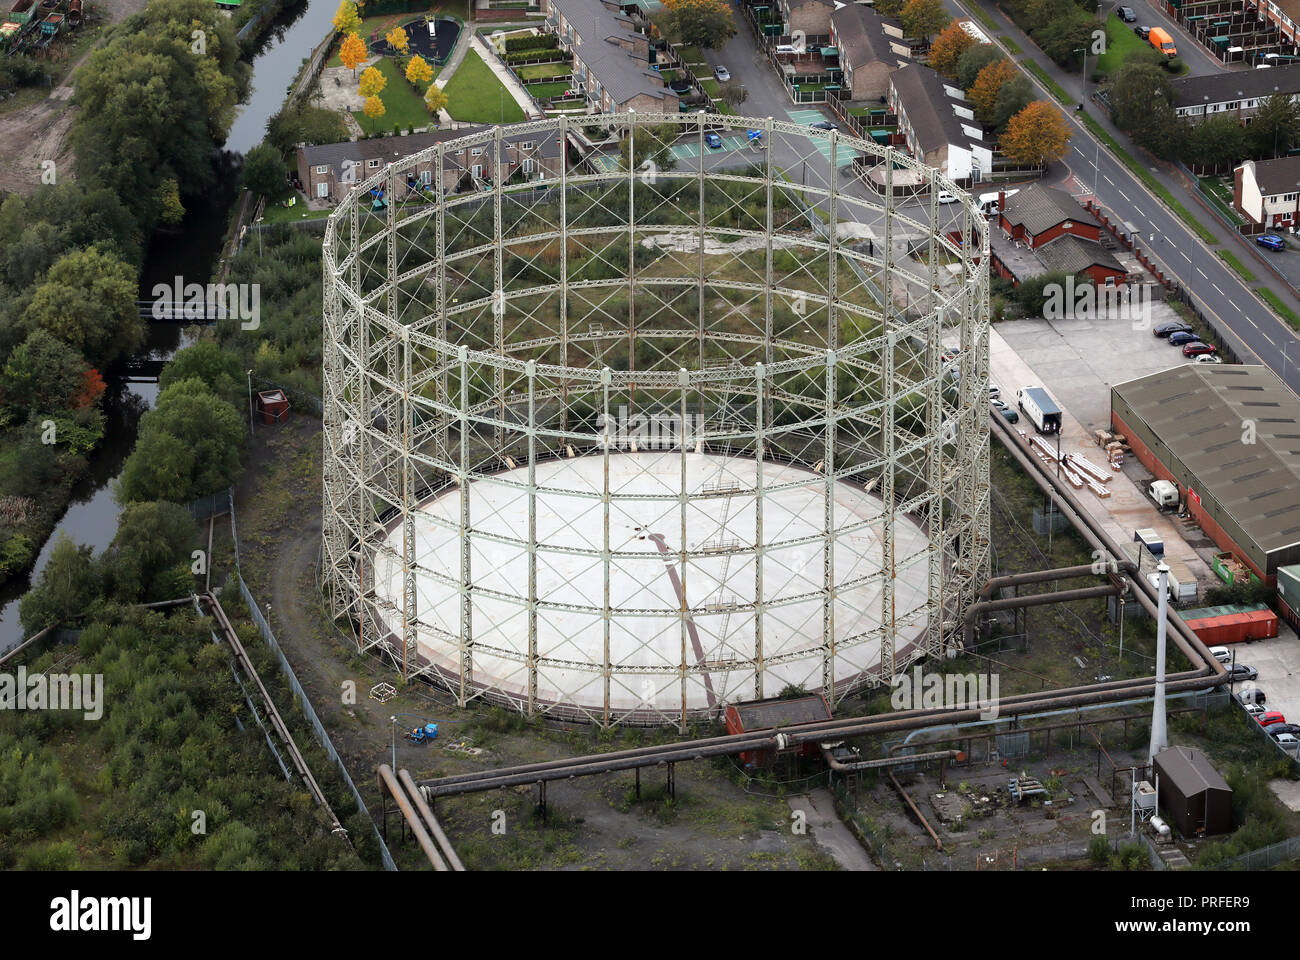 aerial view of a gasometer or town gas holder in Manchester, UK Stock Photo